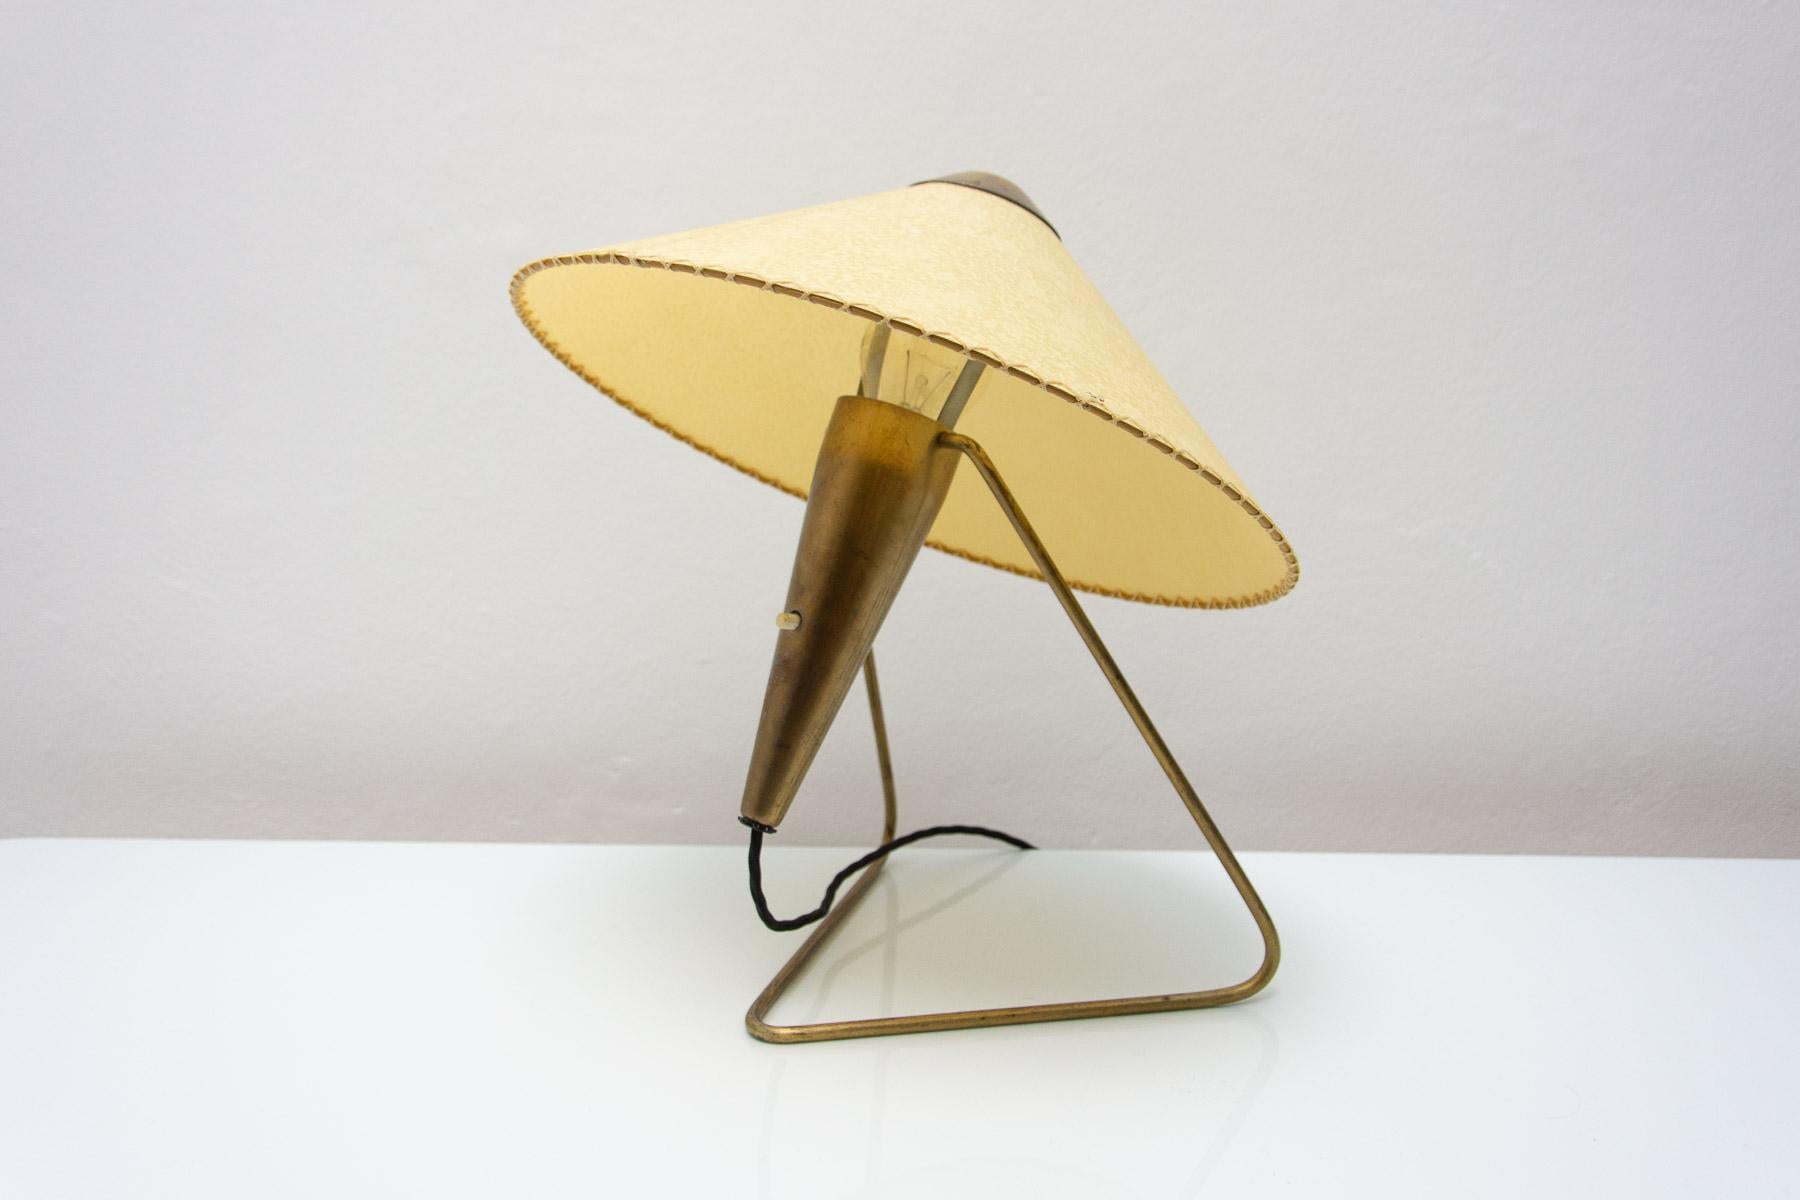 Mid century modern tripod desk lamp was designed by Helena Frantova and produced by Okolo in the 1950 in the former Czechoslovakia. It´s made of brass.

This lamp was made by Žukov company.

This table lamp exists in several variations. Made with a